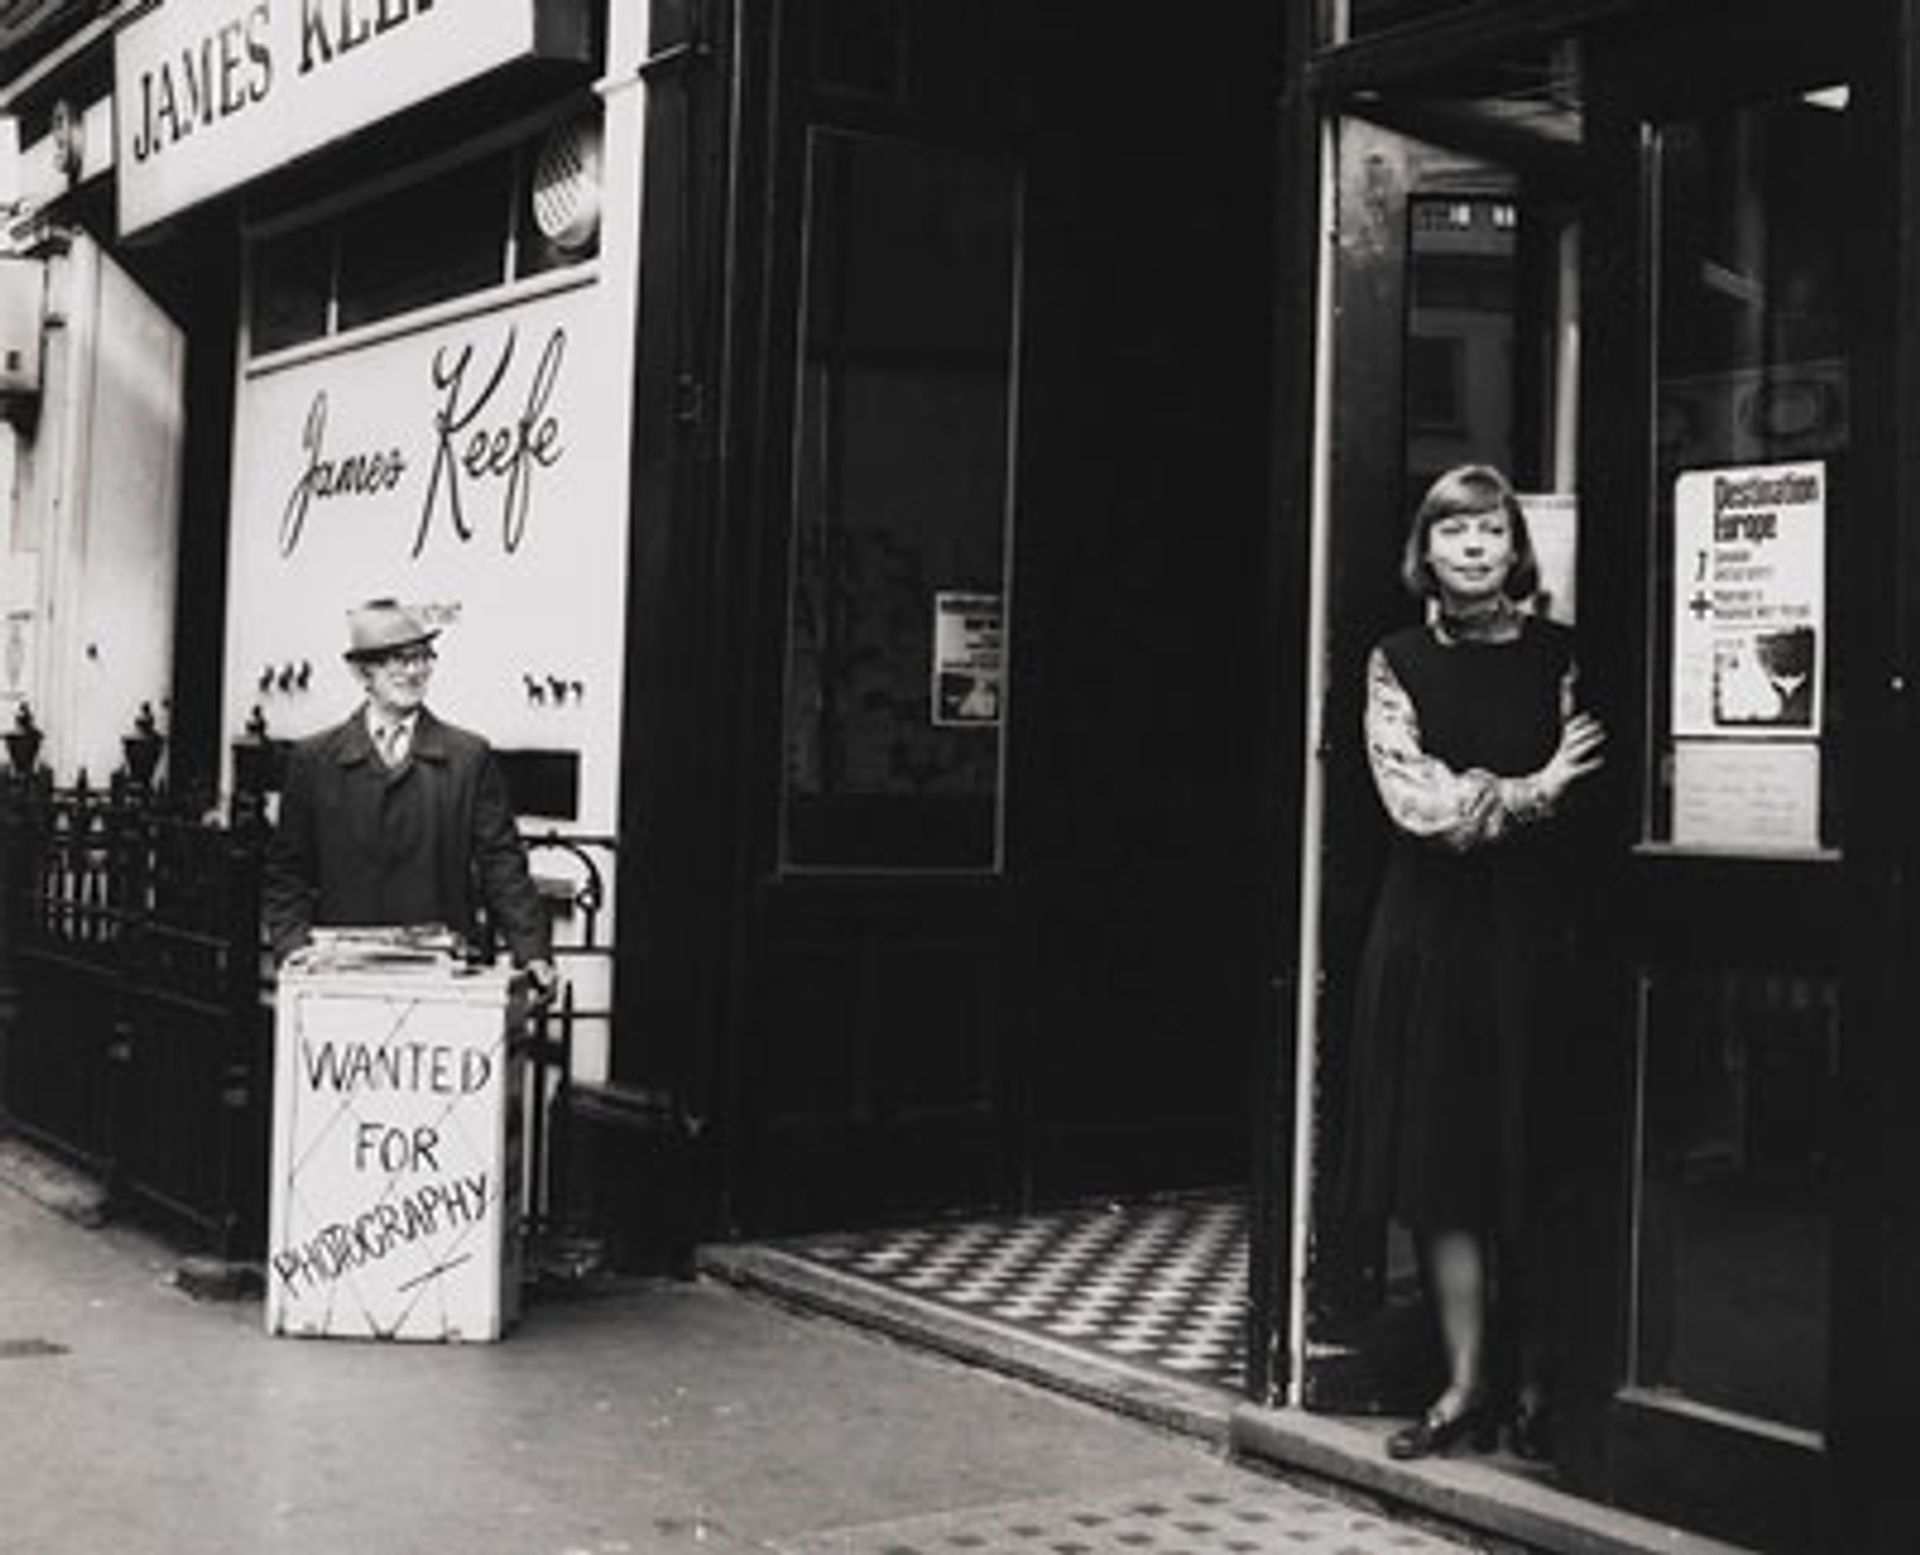 Sue Davies, the founder of the Photographers' Gallery standing at its entrance on Great Newport Street, between Leicester Square and Covent Garden